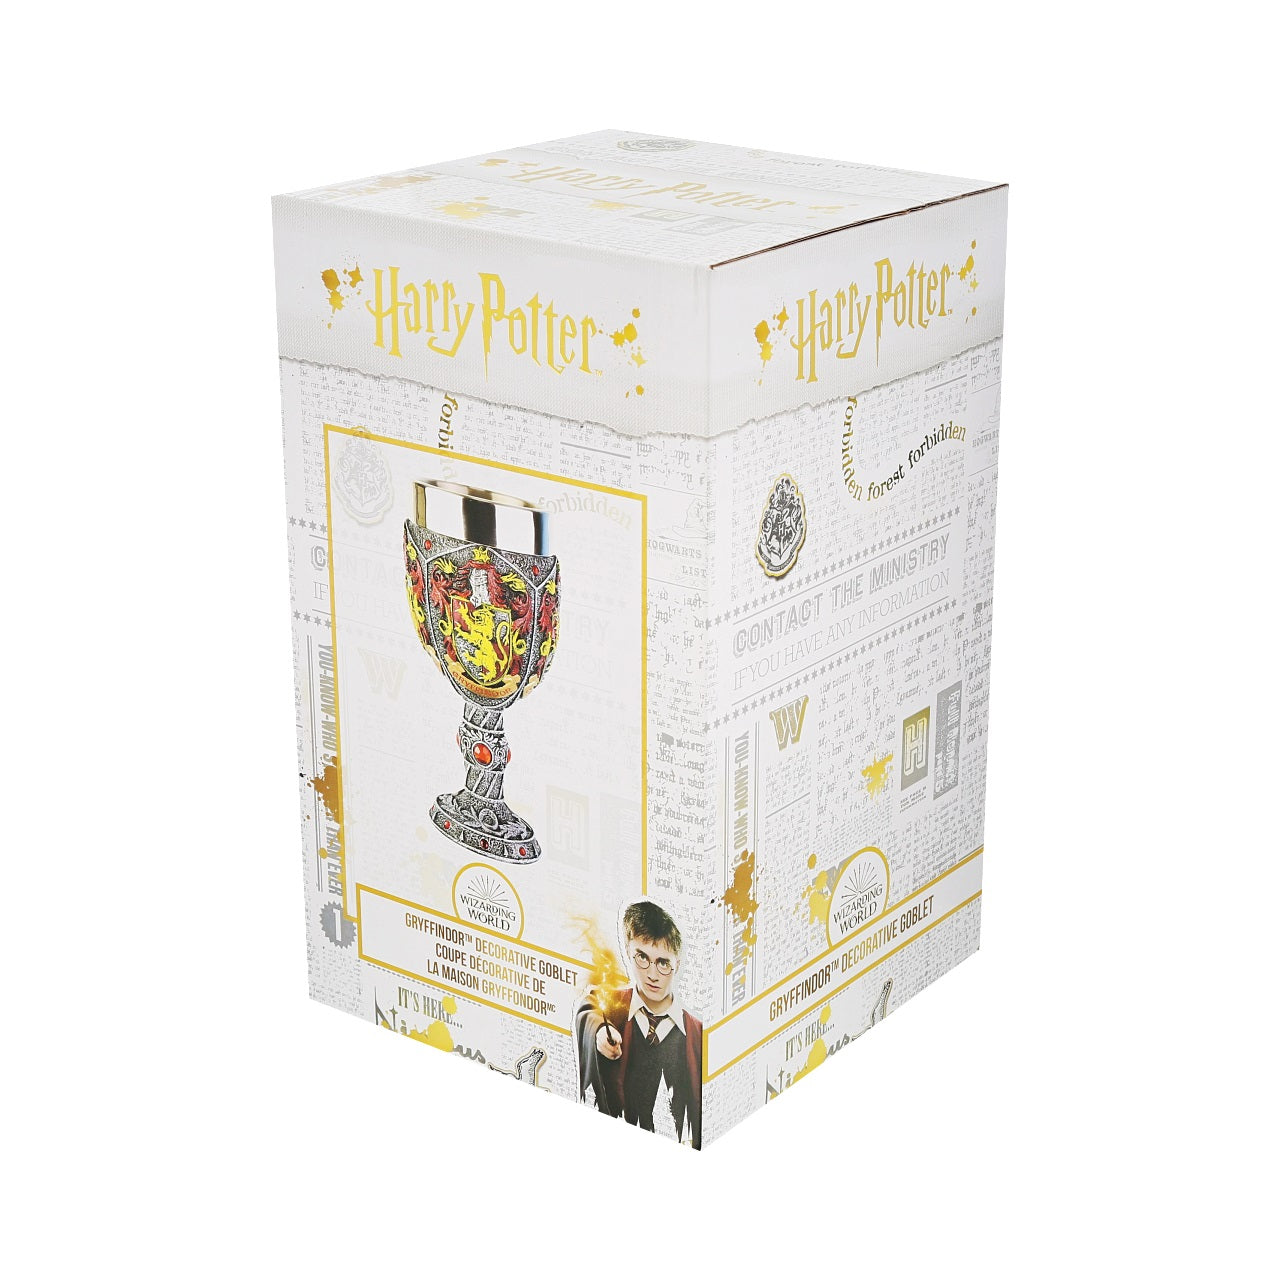 Harry Potter Gryffindor Decorative Goblet  So the sorting hat has placed you in the Gryffindor house. With a lion as its crest and Professor McGonagall at its head, Gryffindor is the house which most values the virtues of courage, bravery and determination.